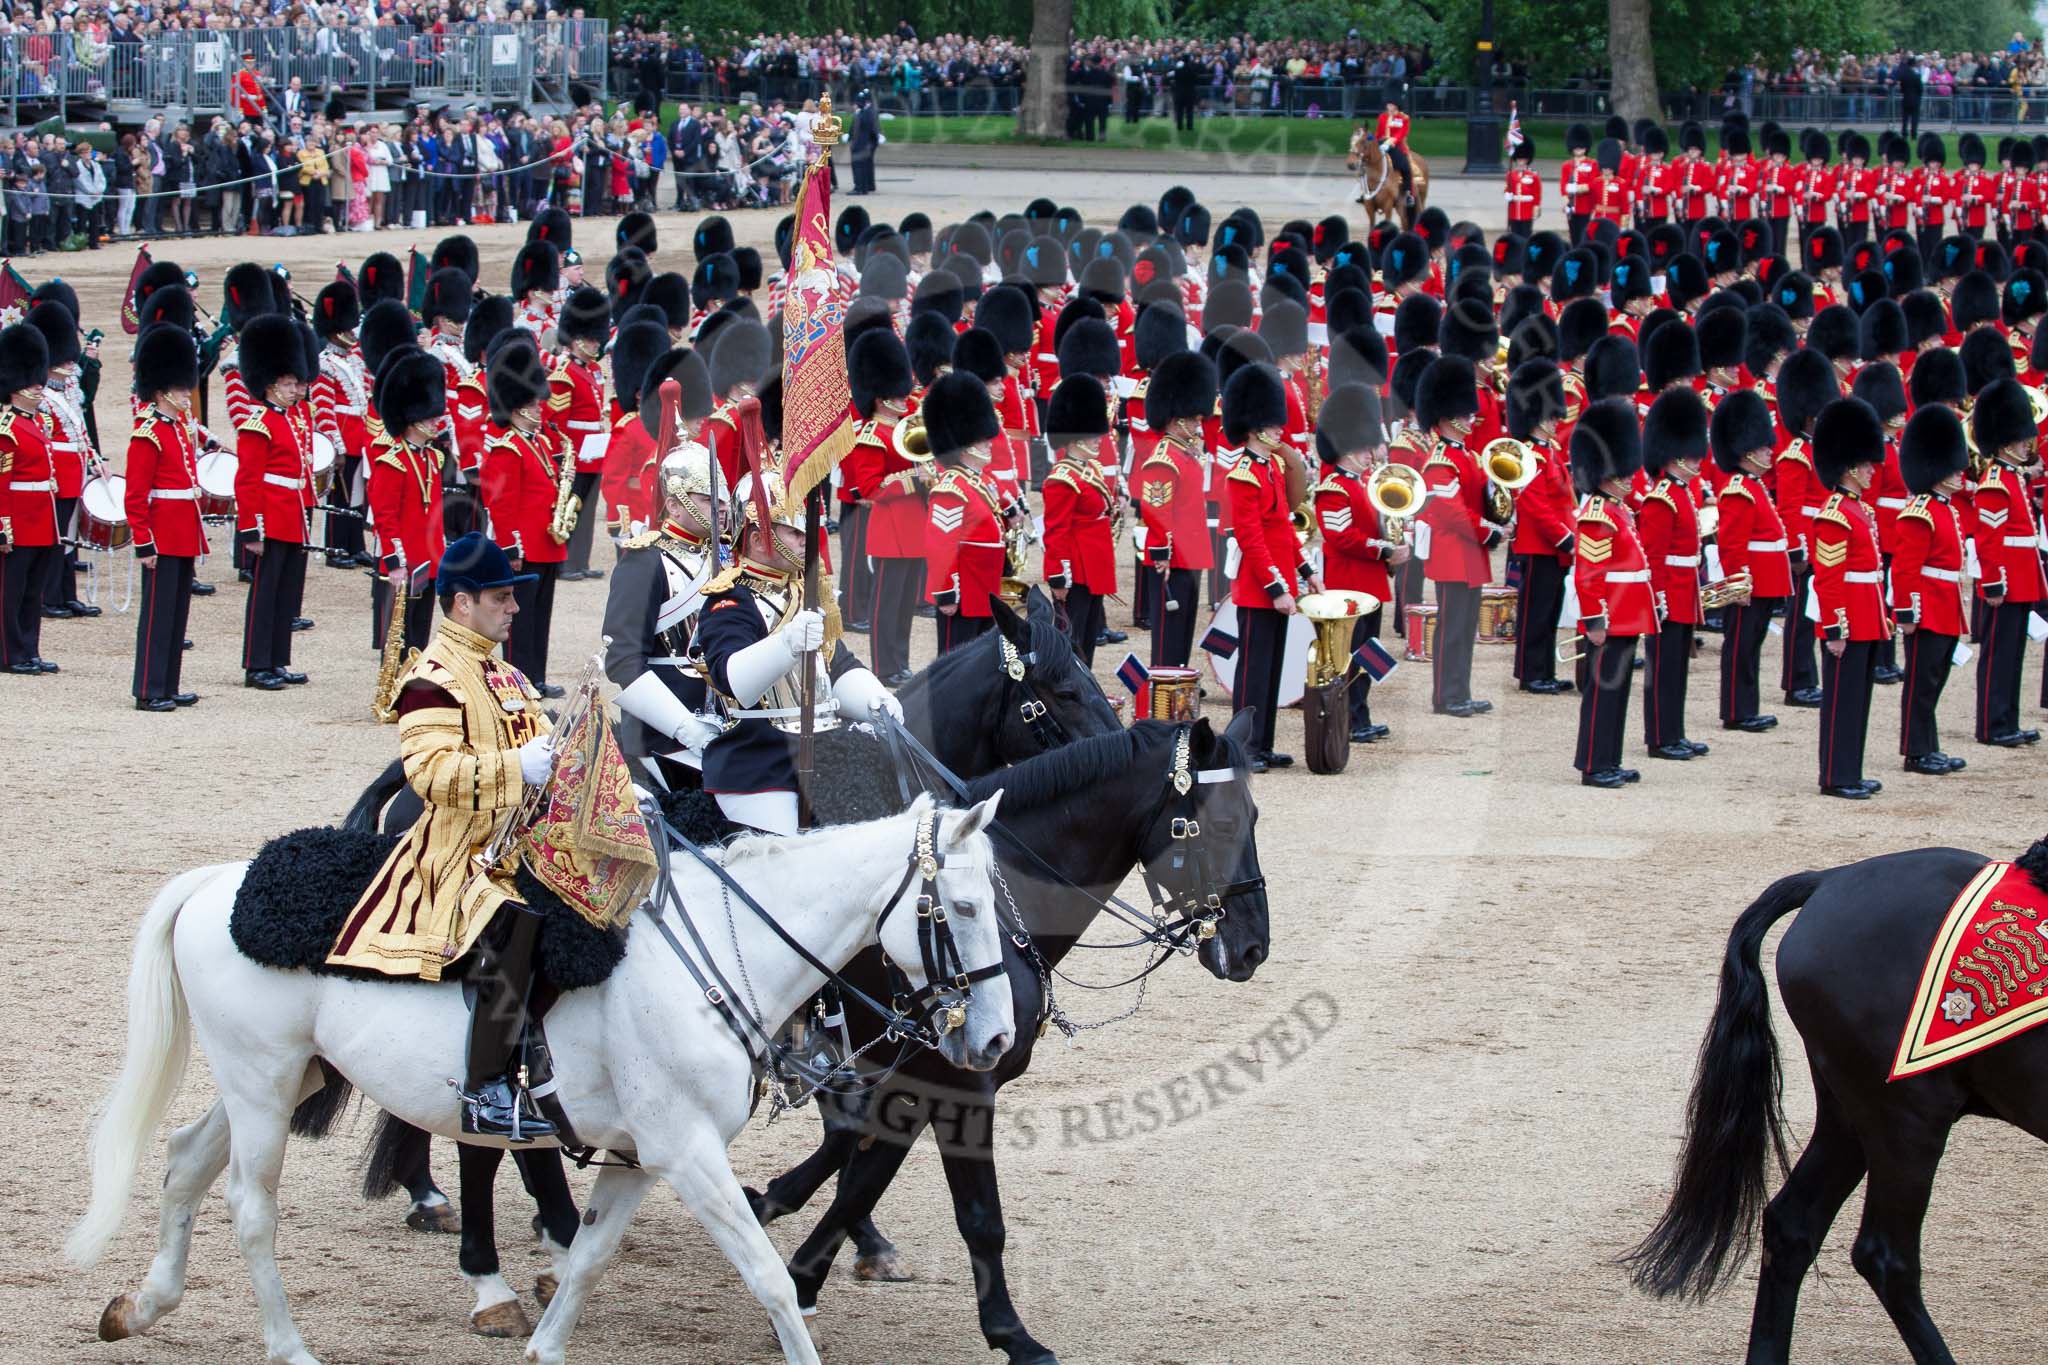 Trooping the Colour 2012: Trumpeter, Standard Bearer, and Standard Coverer during the Ride Past..
Horse Guards Parade, Westminster,
London SW1,

United Kingdom,
on 16 June 2012 at 11:55, image #556